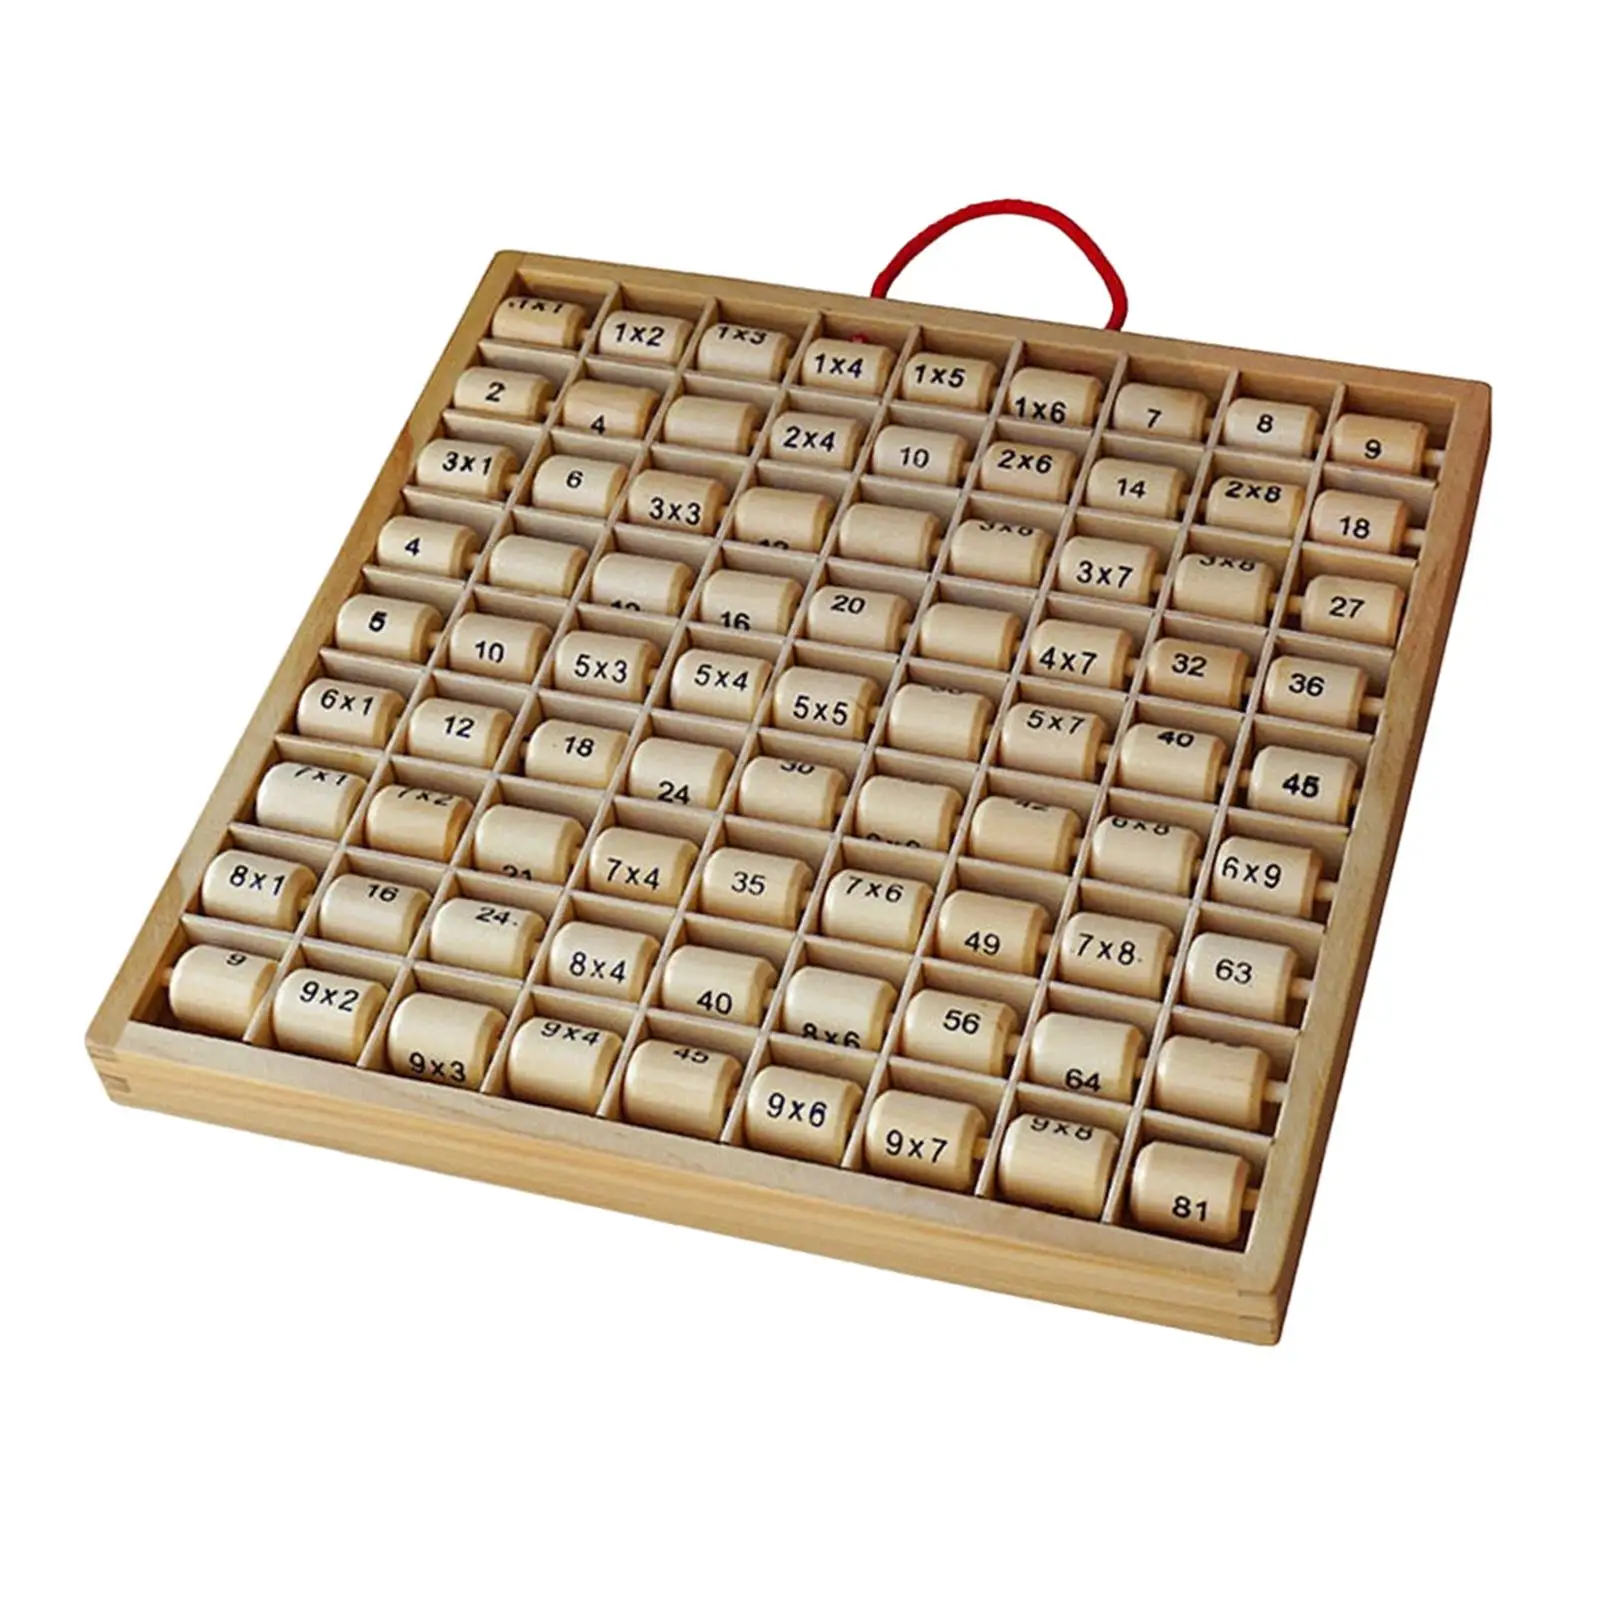 Wooden Multiplication Board Number Games Counting Learning Toy Mathematics Multiplication Table Board Game for Toddlers Girls